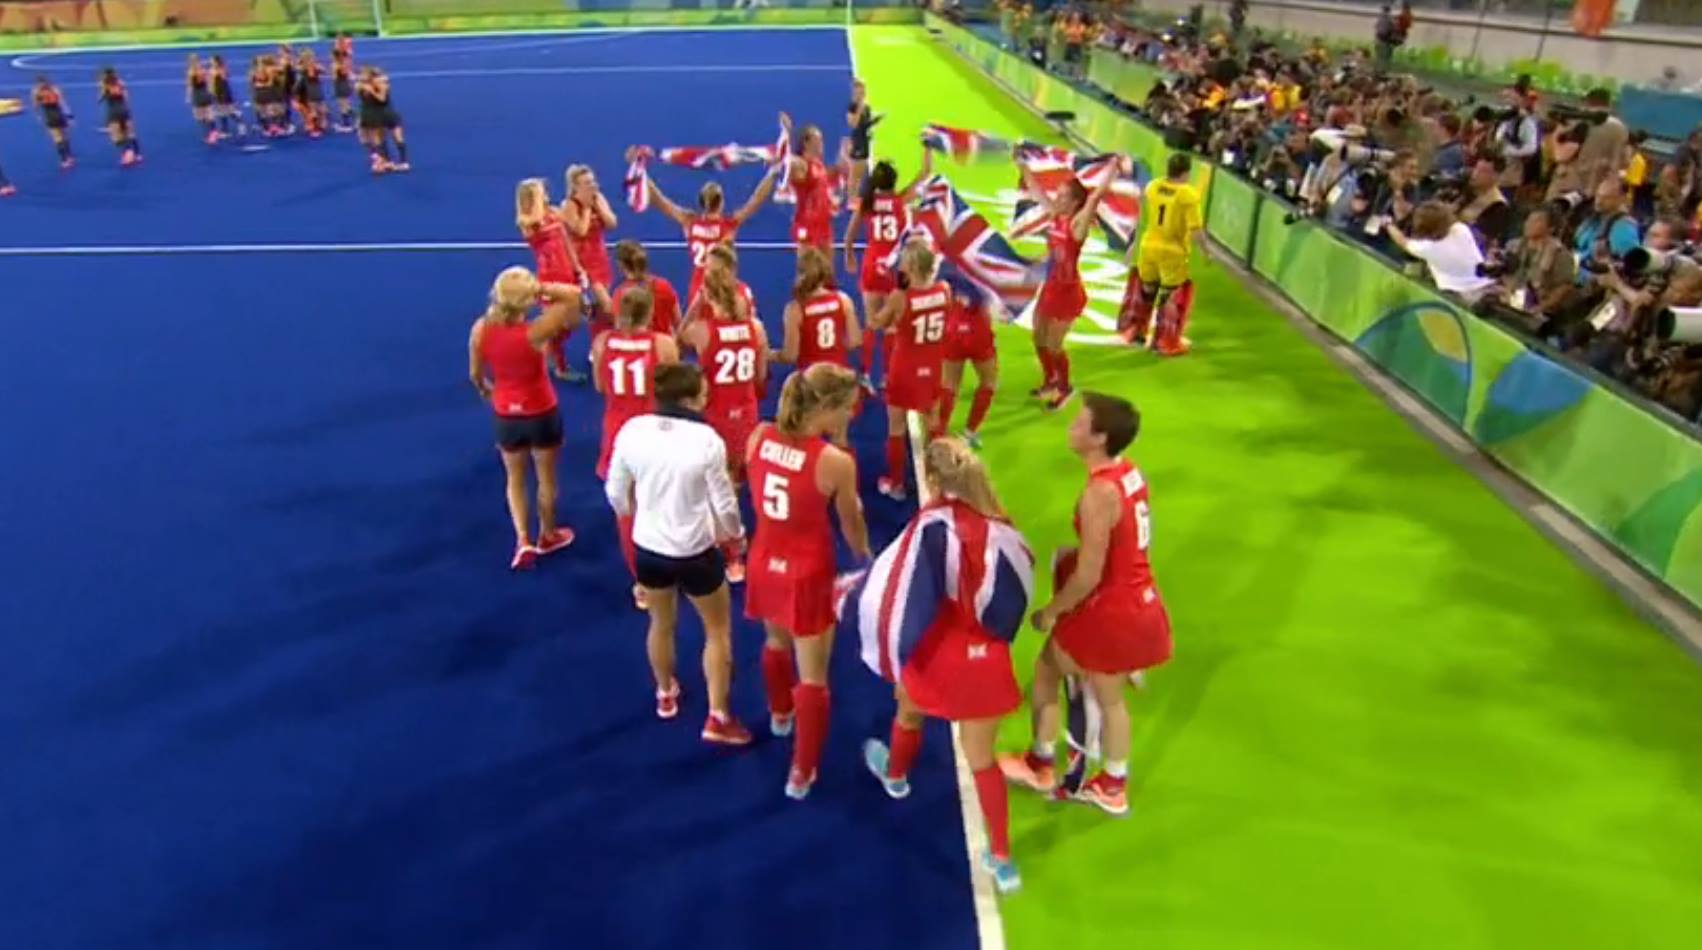 The win came after a penalty shootout that sealed the gold for Team GB